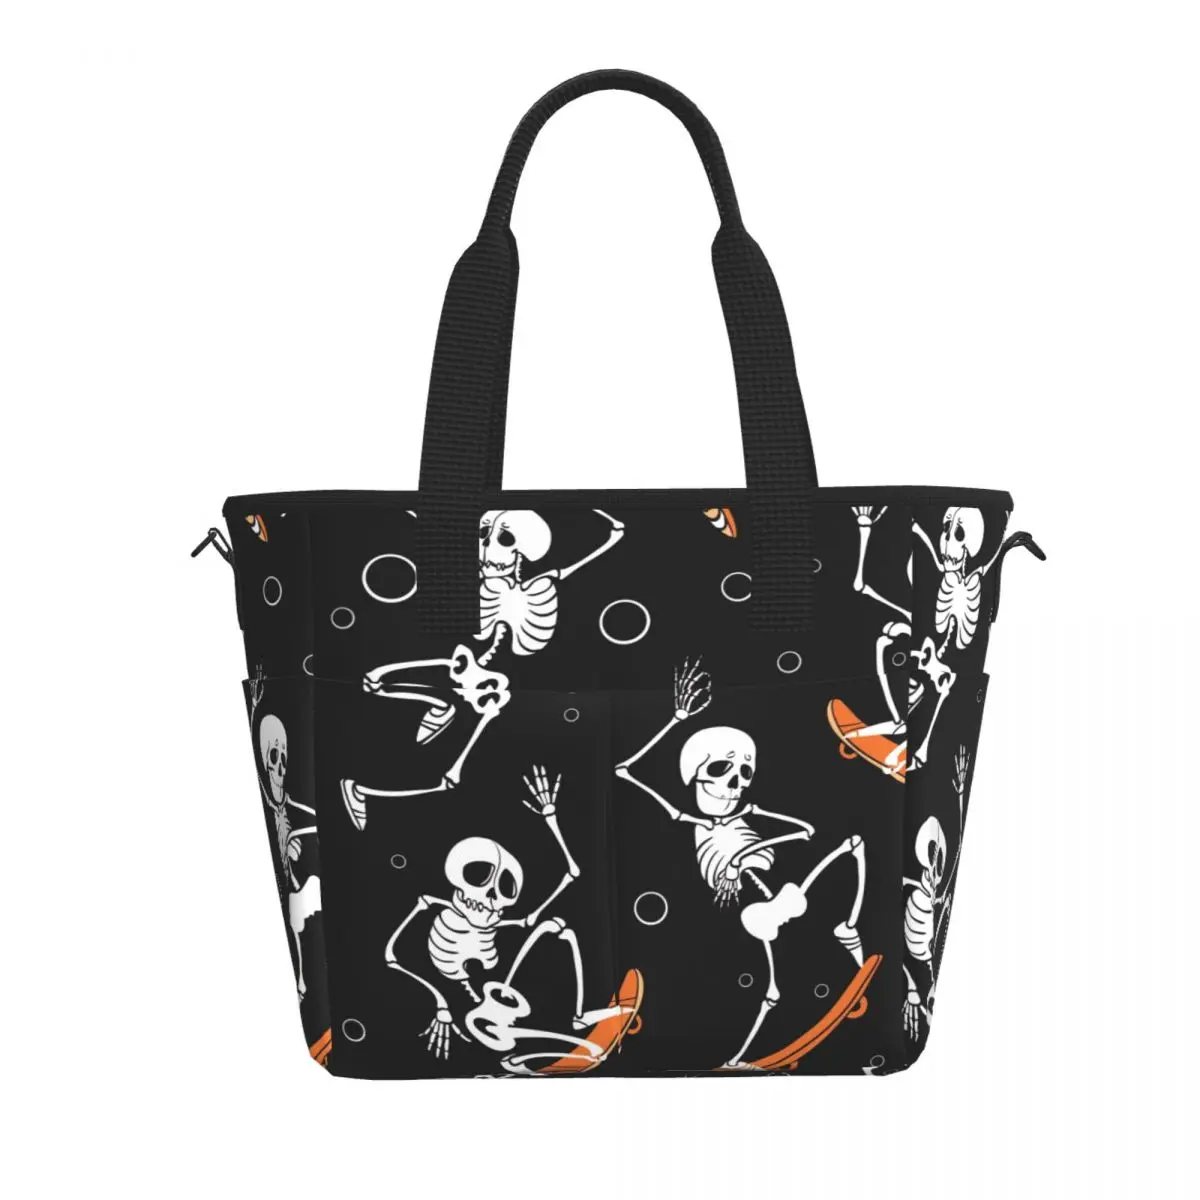 

Travel Insulated Lunch Bag Skateboarding Jumping Skeletons Spooky Print Large Capacity Food Case for Picnic